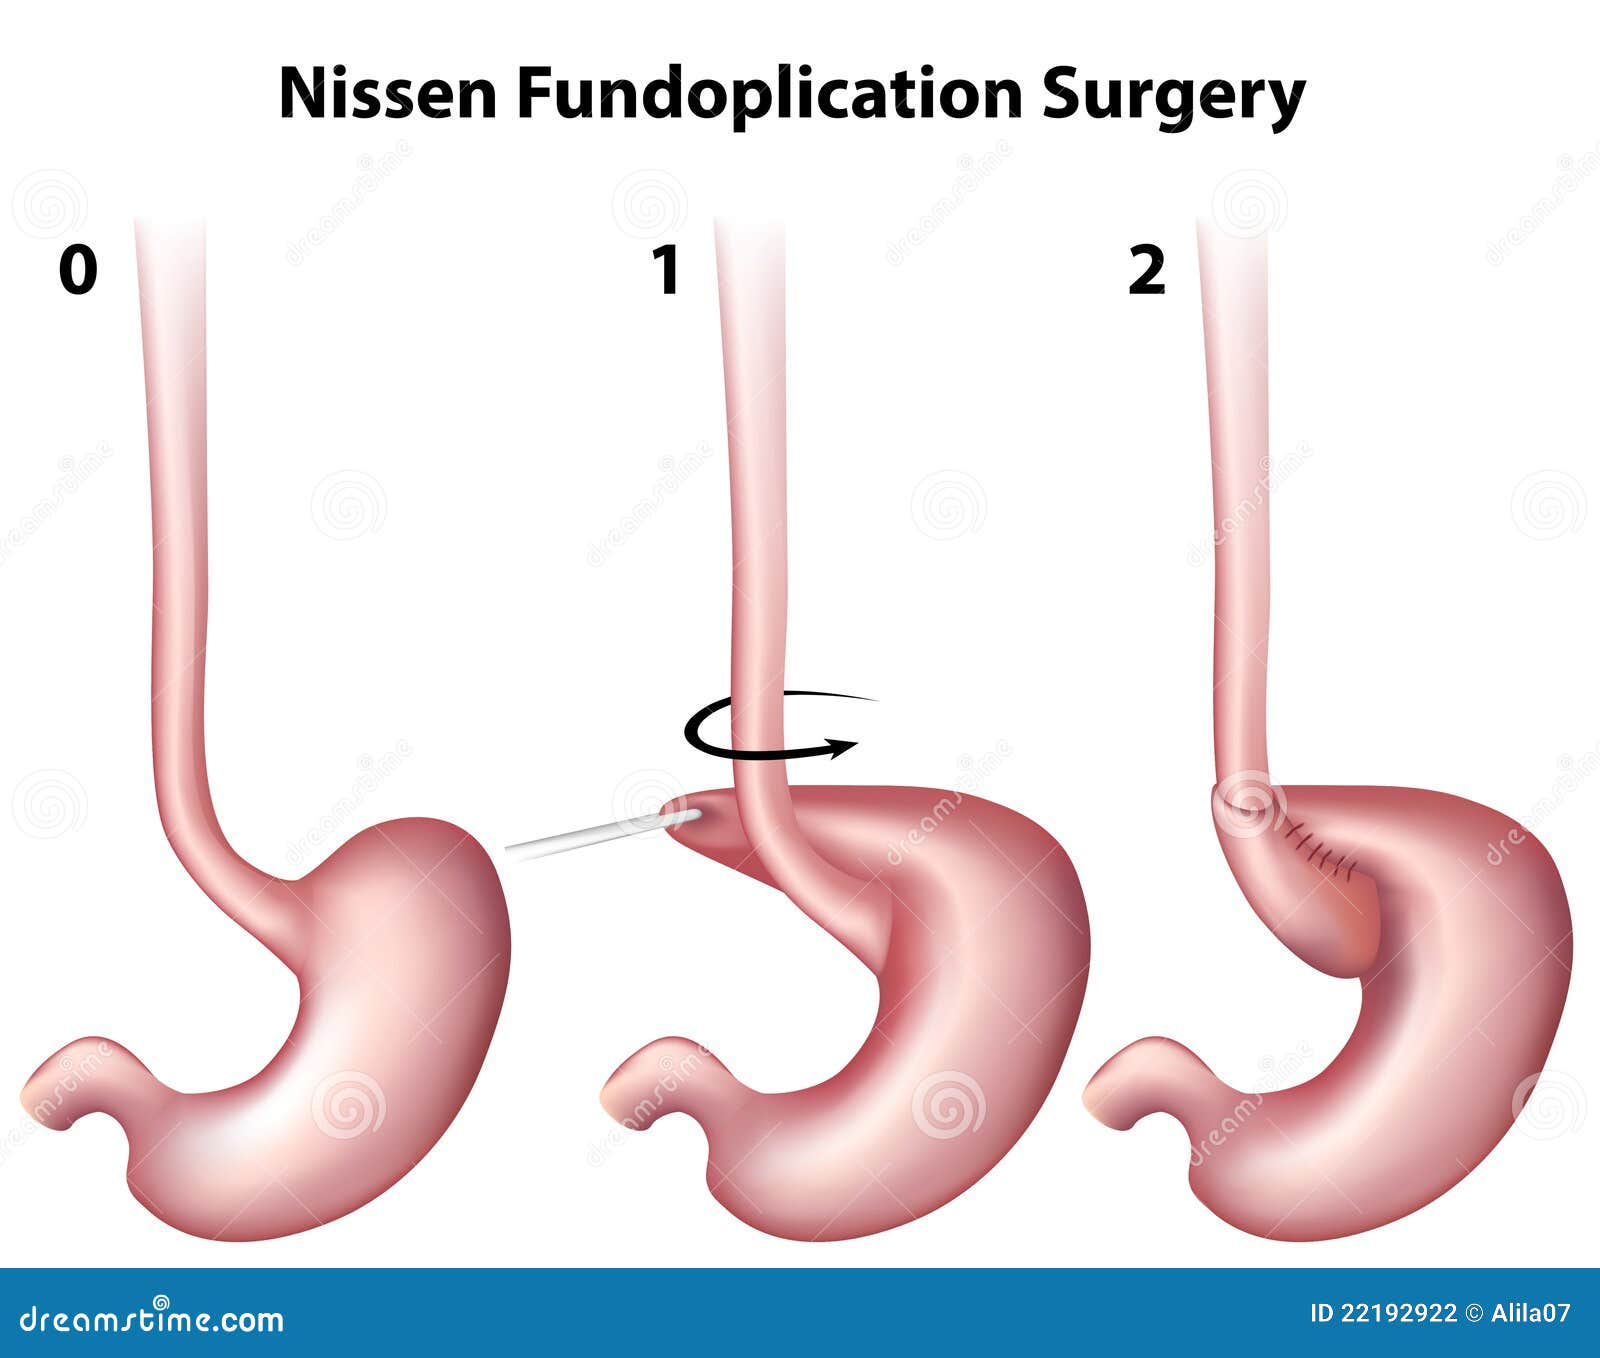 Nissen Fundoplication Surgery used in treatment of heartburn and 